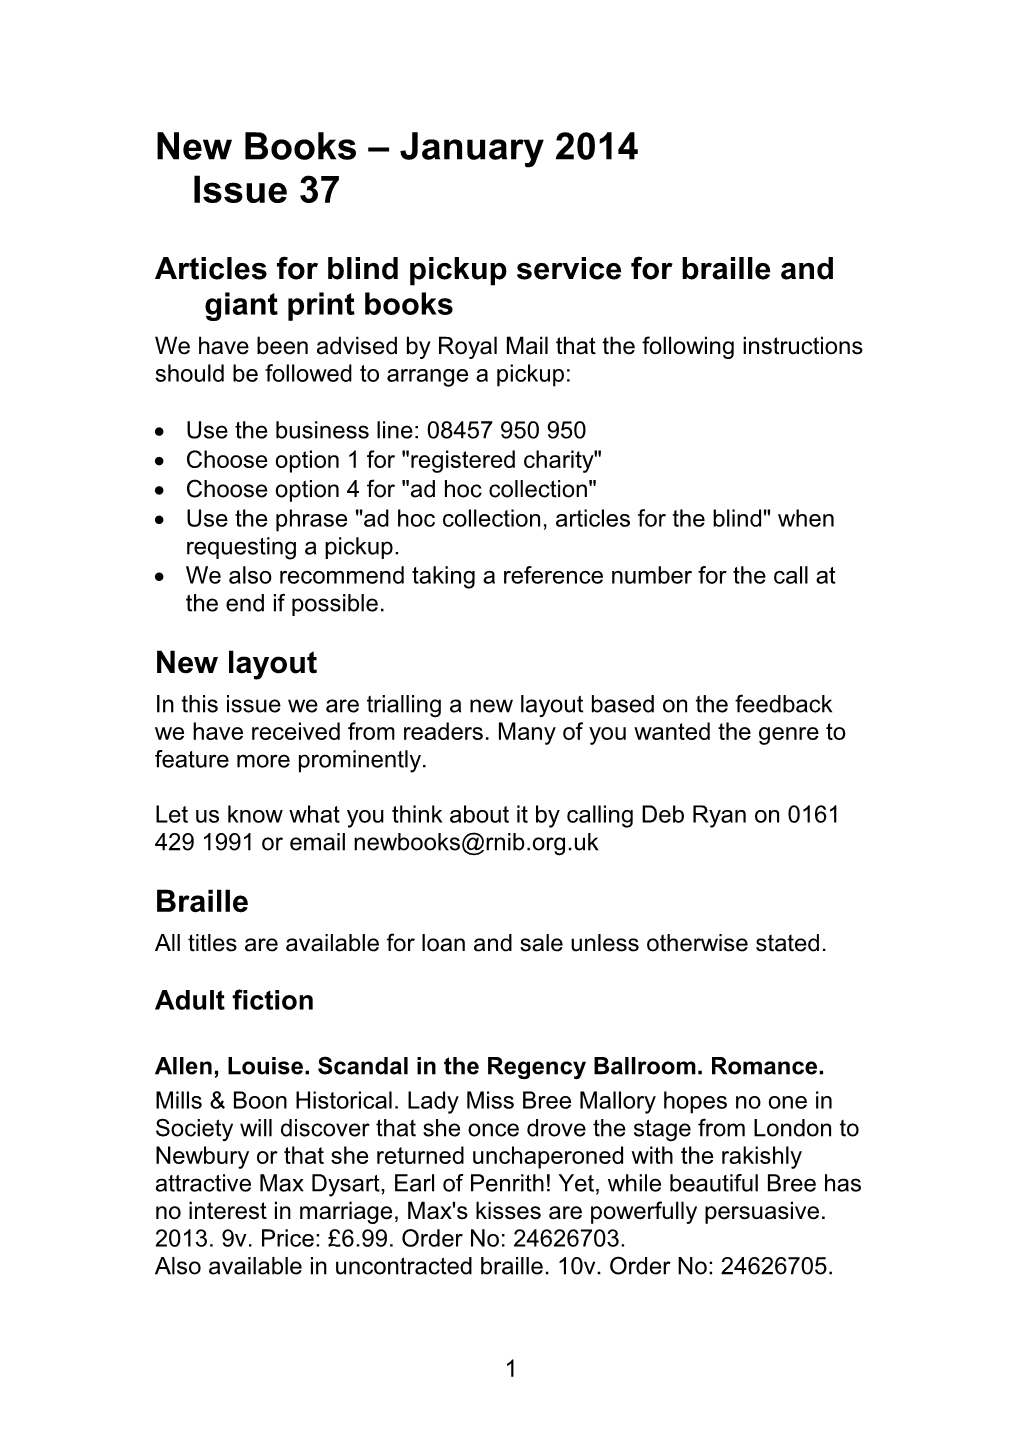 Articles for Blind Pickup Service for Braille and Giant Print Books